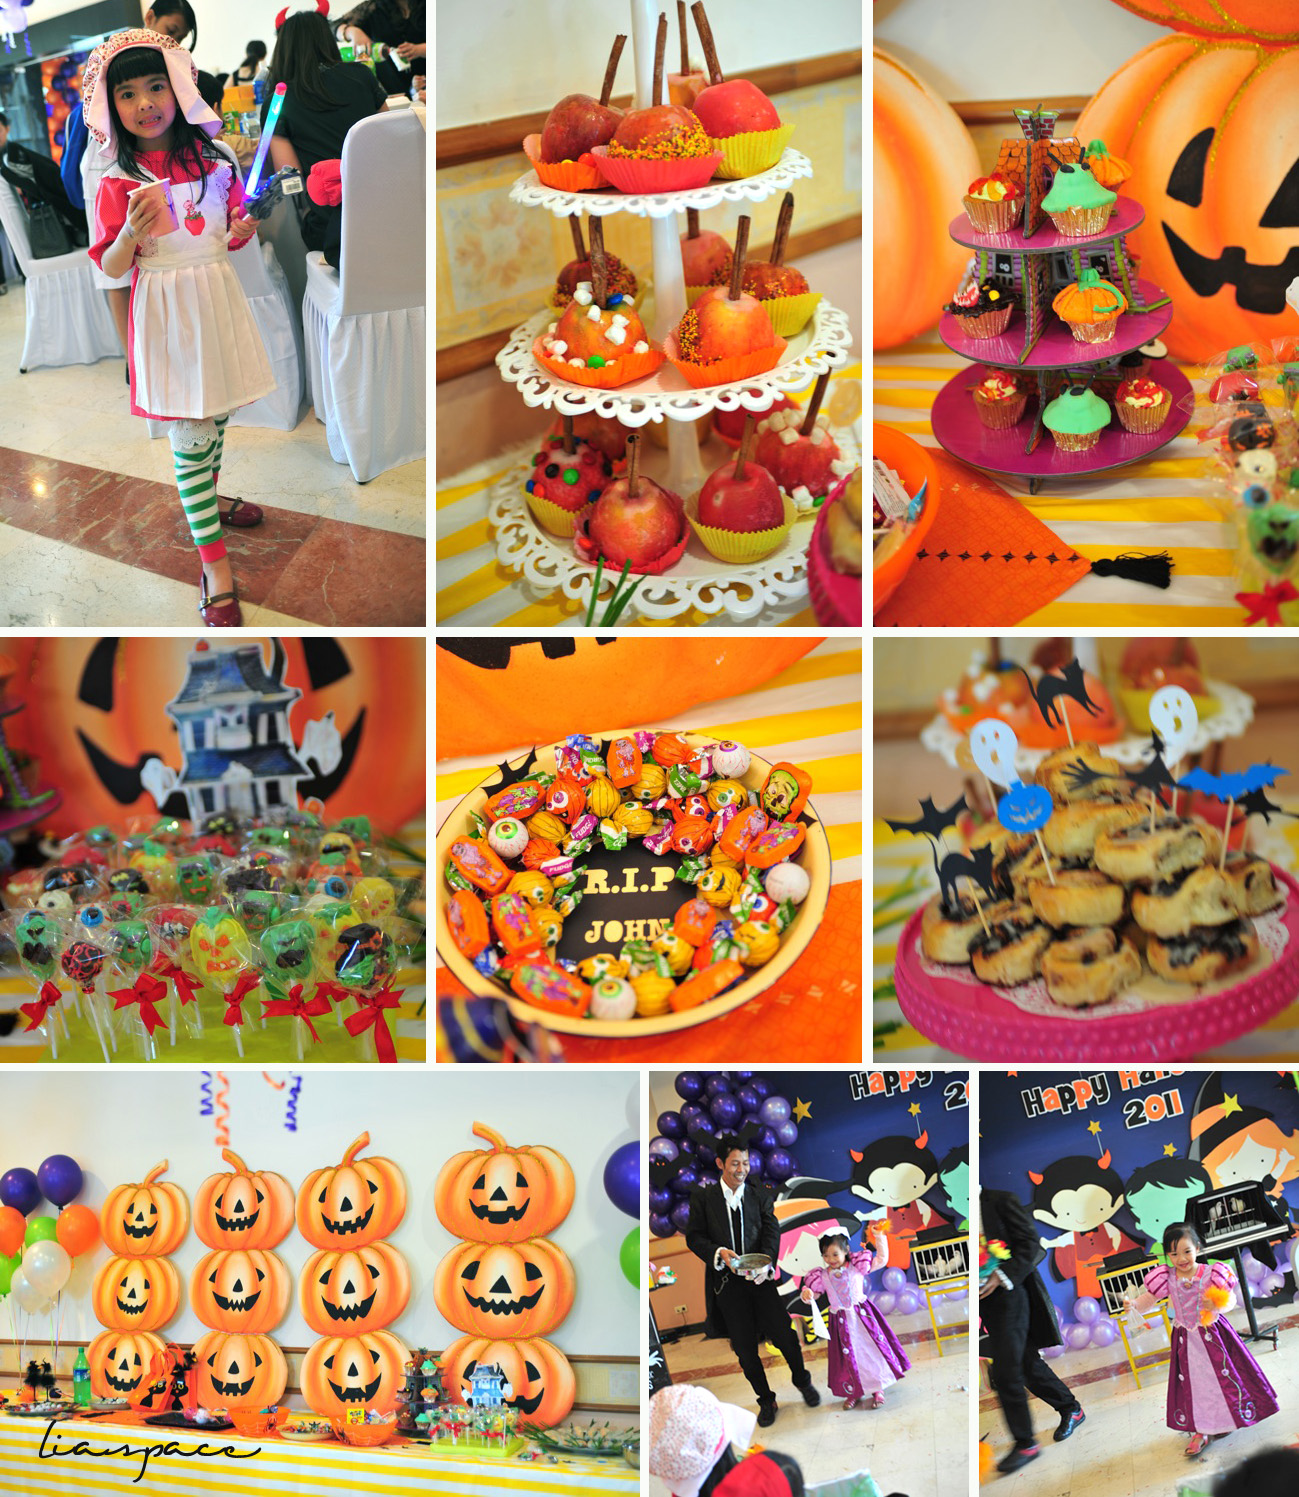 The Candy Halloween Table,